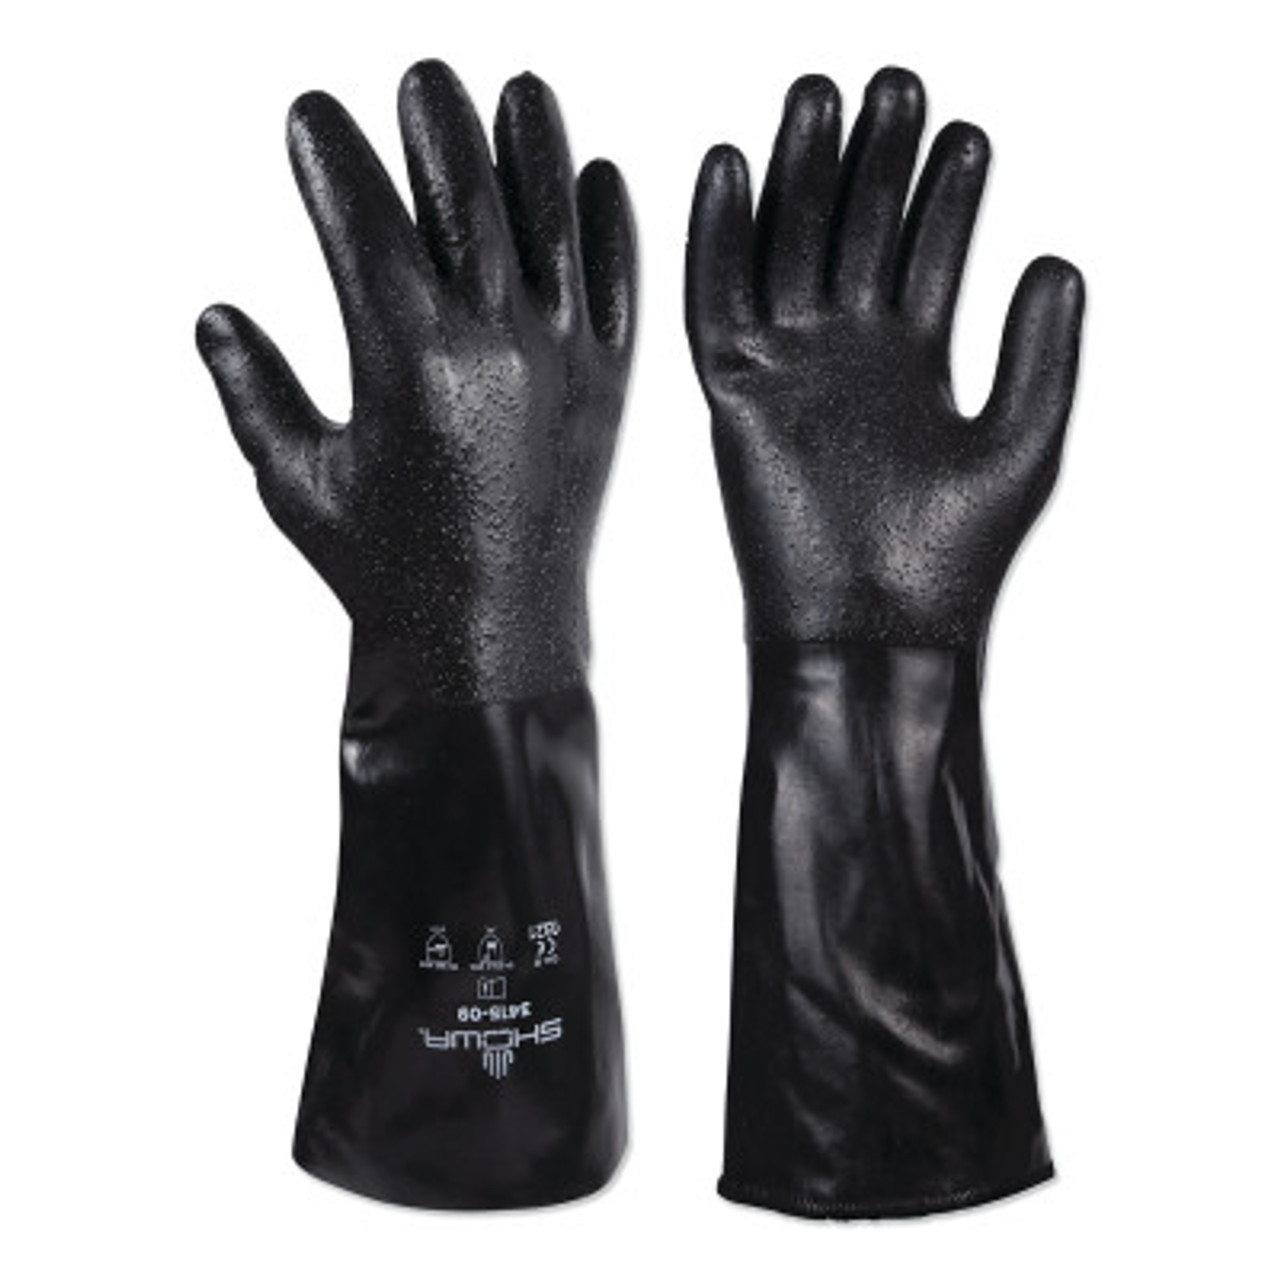 SHOWA 3416 Cut and Chemical Resistant Neoprene Gloves, Rough, Large ...